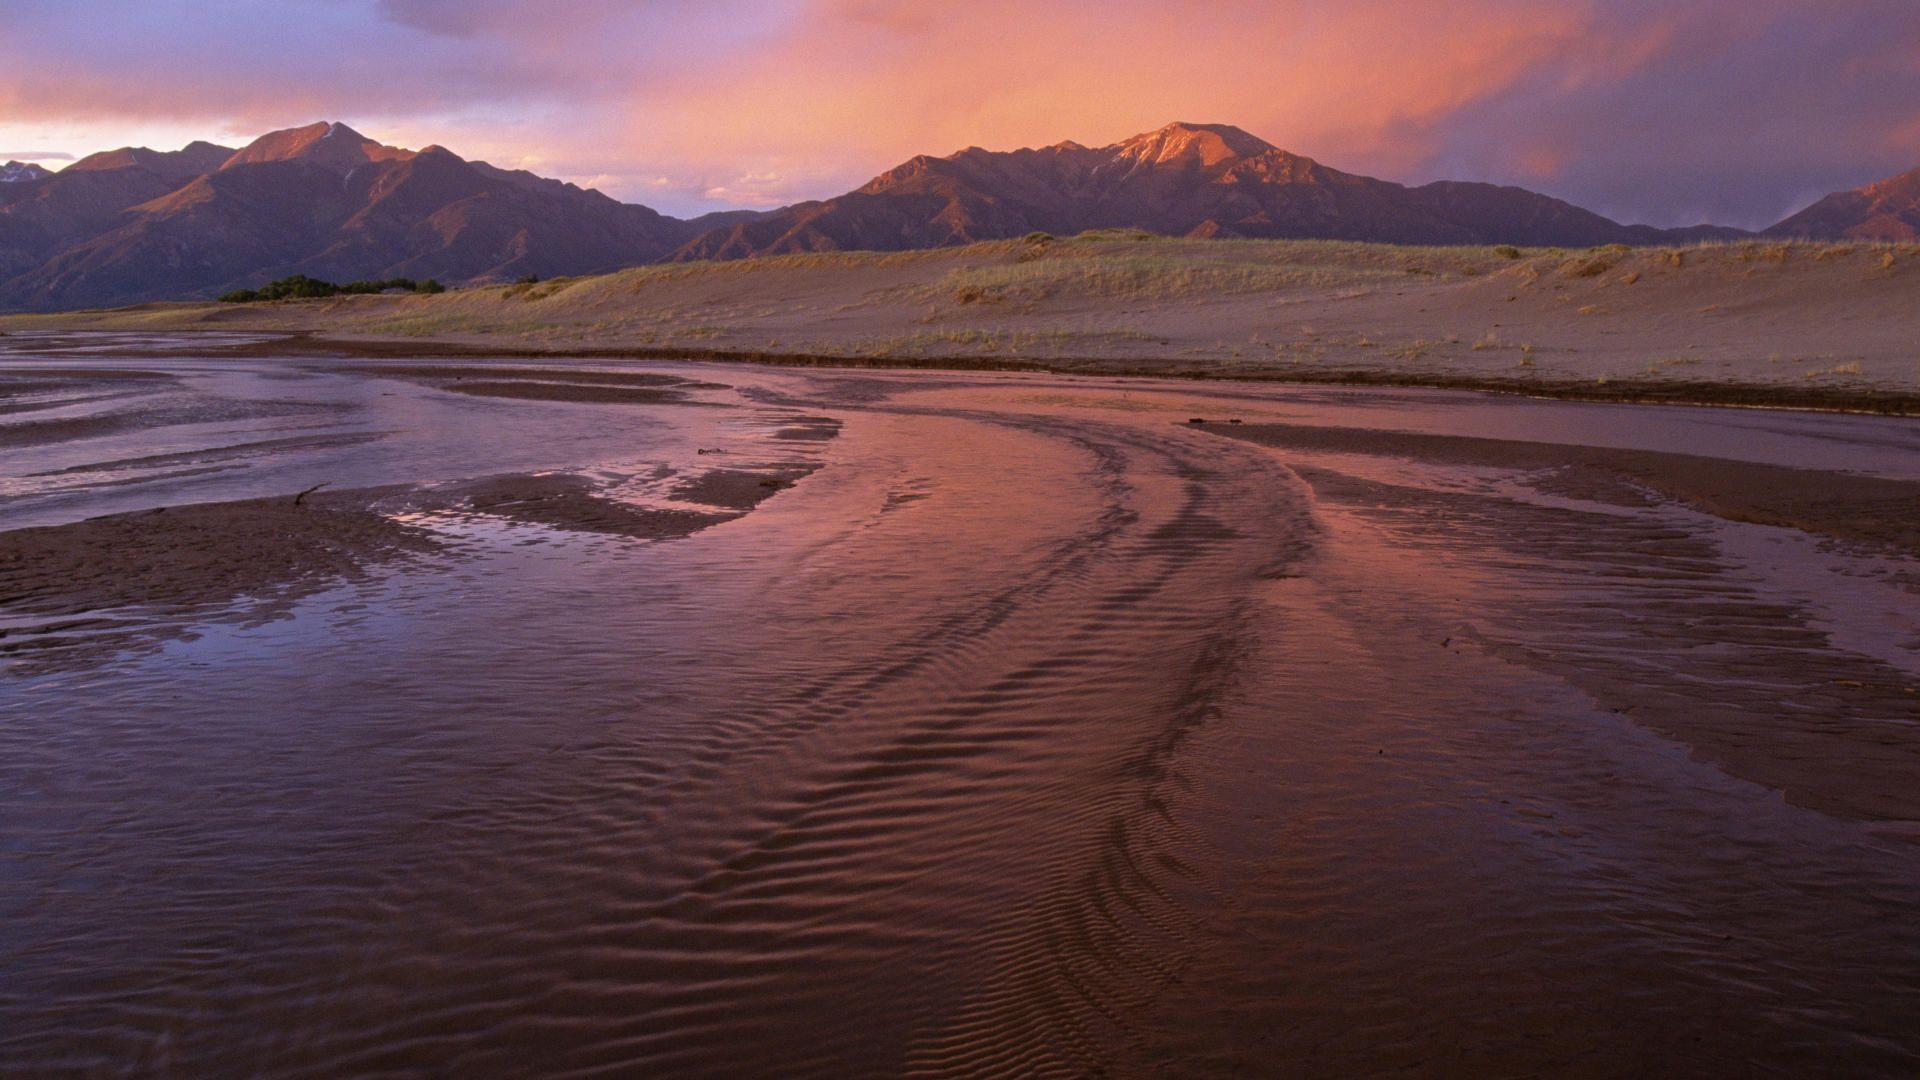 HD Great Sand Dunes National Park Wallpaper and Photo. HD